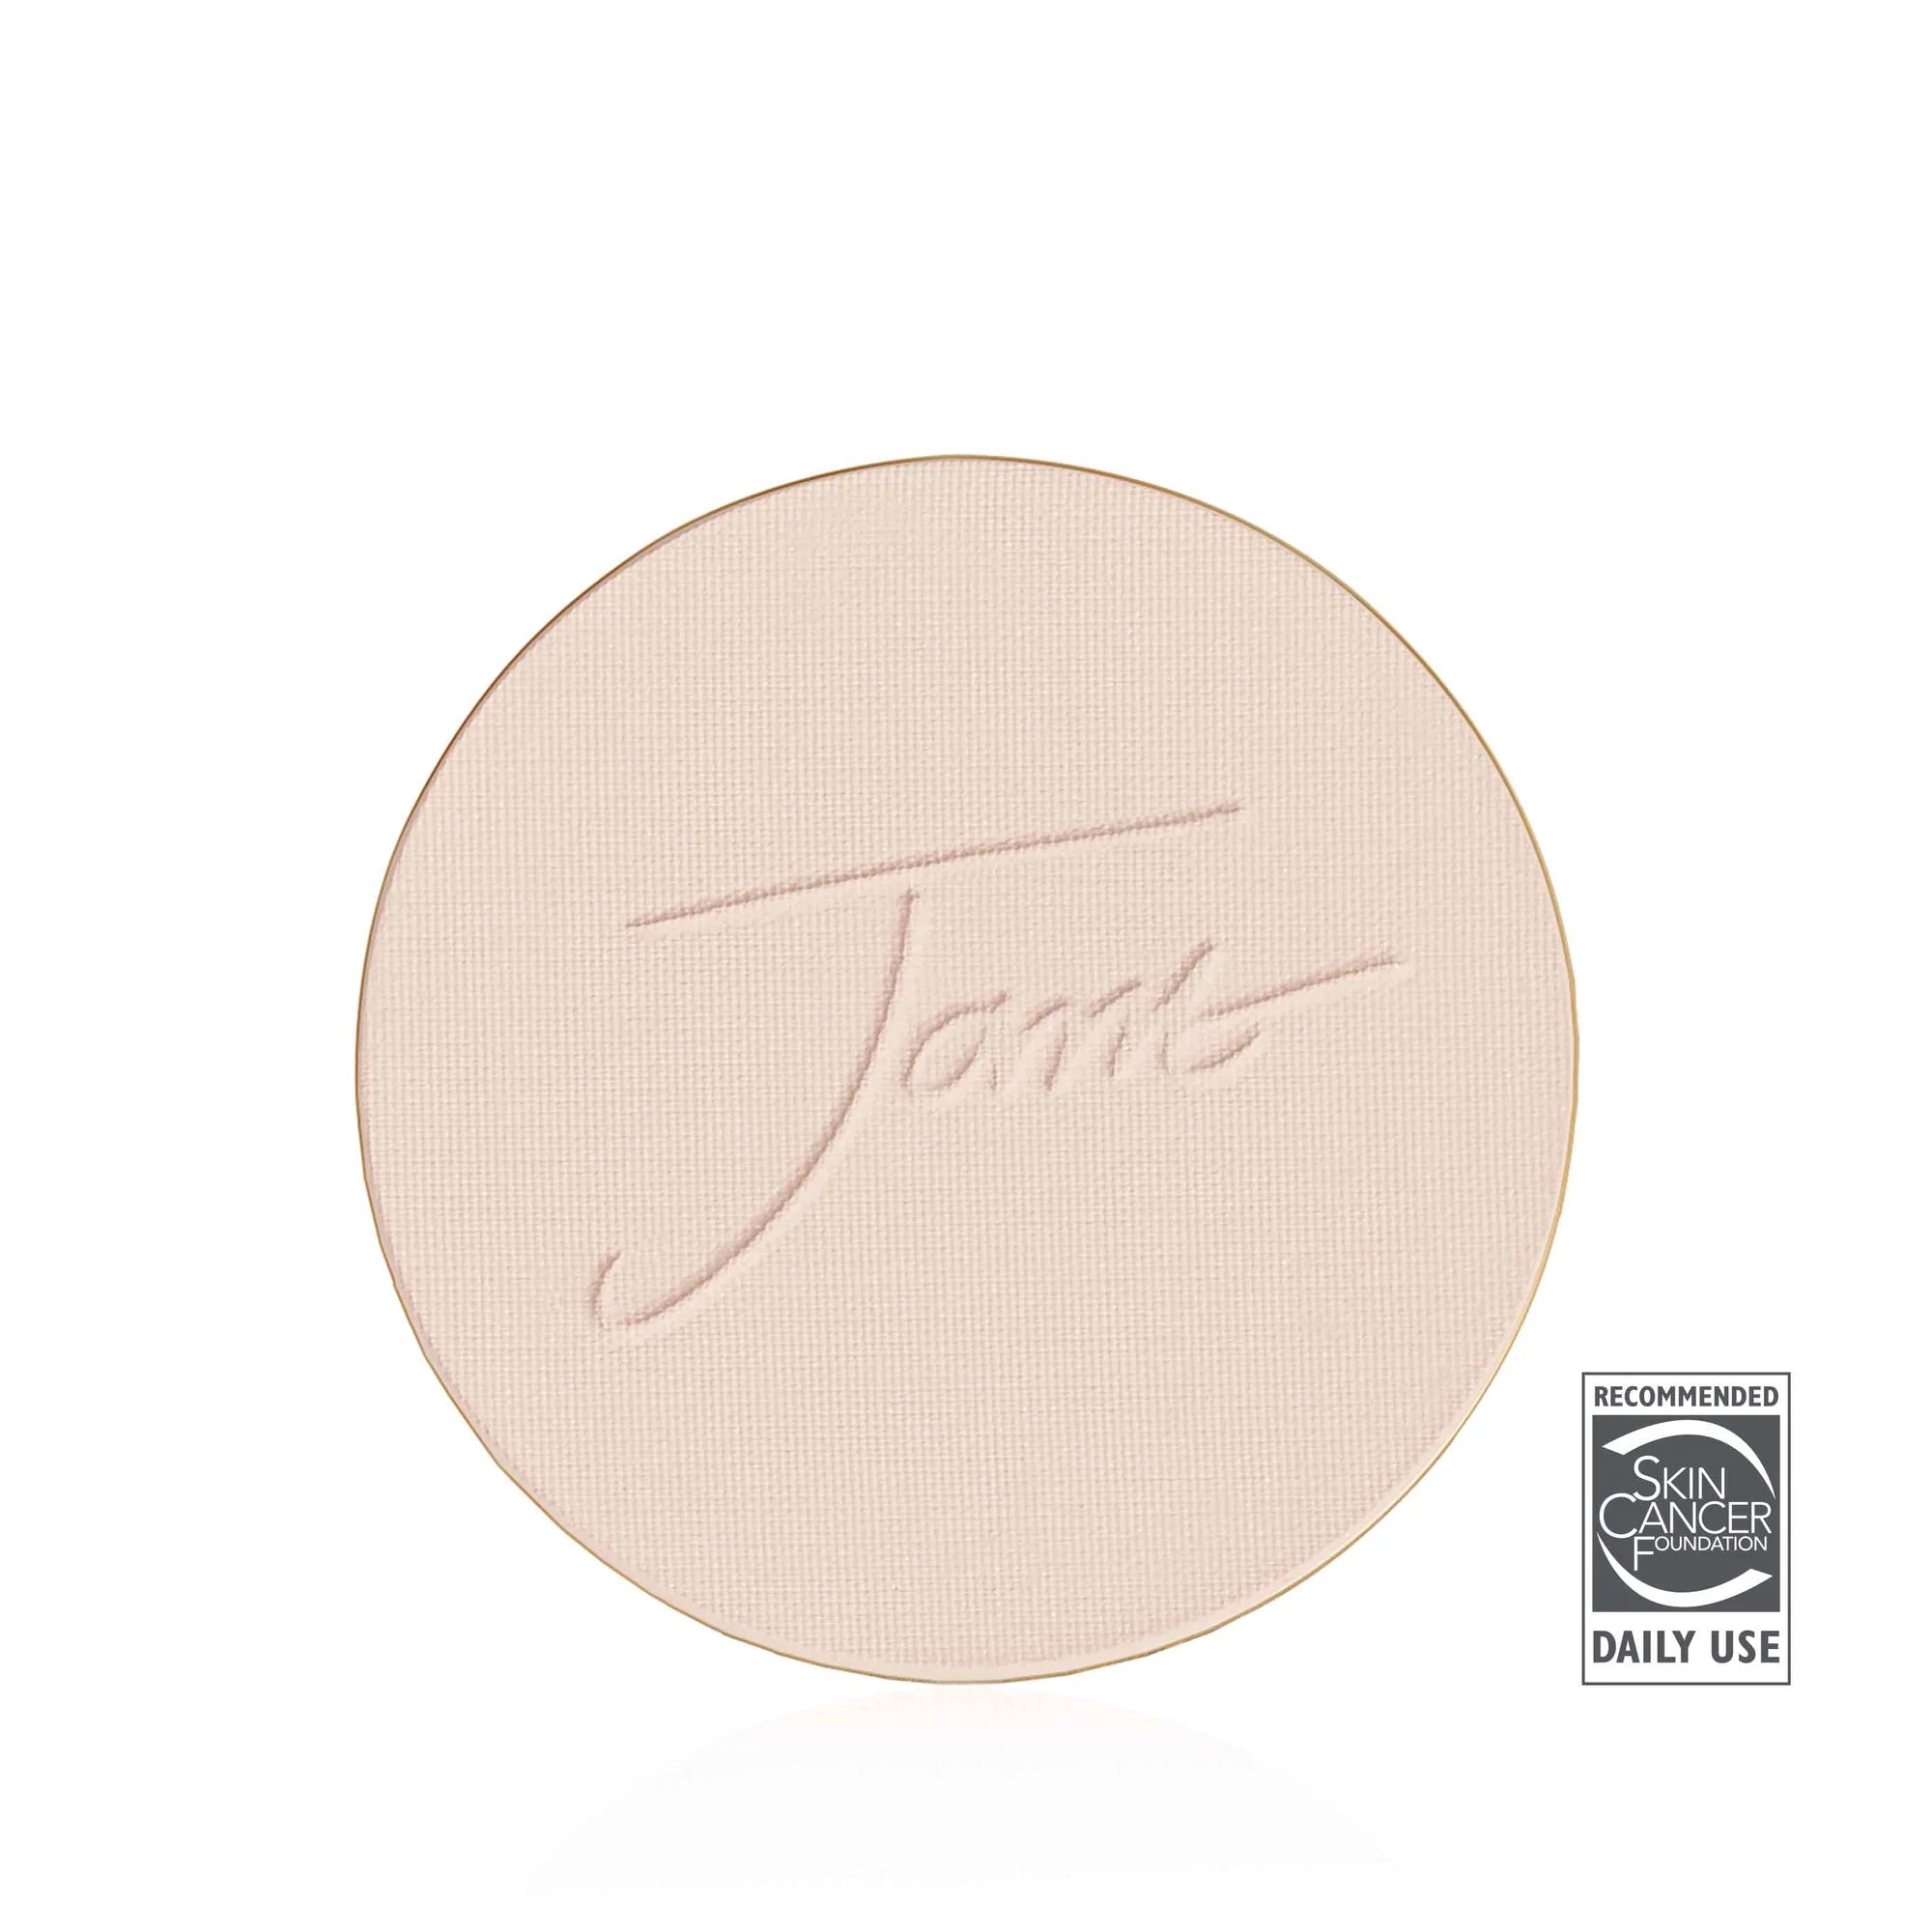 JANE IREDALE PURE PRESSED BASE POWDER REFILL